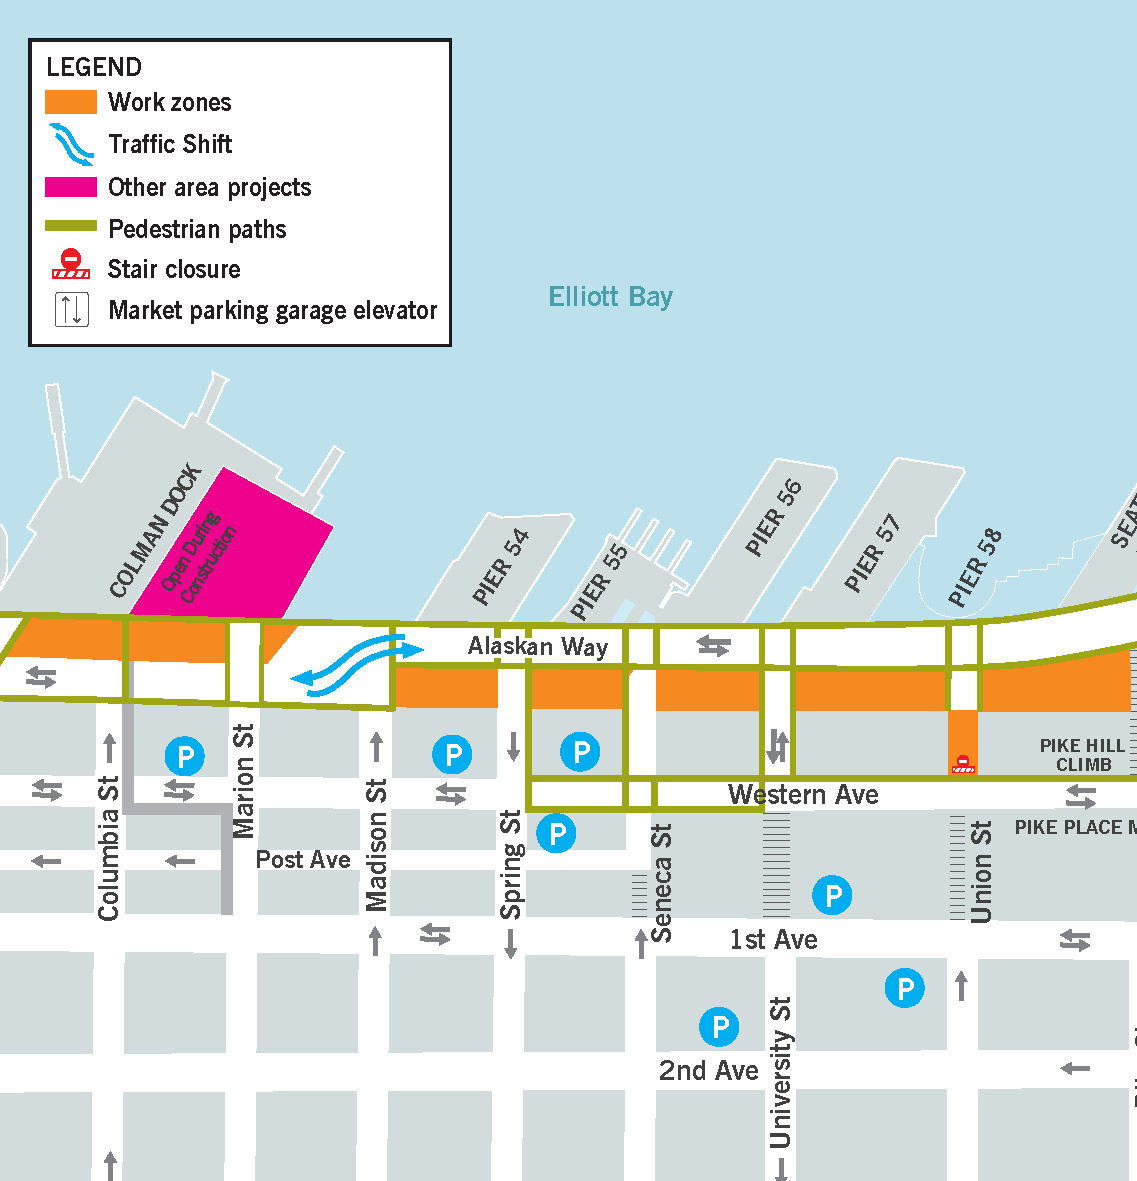 Map showing construction work zones between Columbia and Union streets on the waterfront. Between Columbia and Madison streets the work zone is on the west side. Between Marion and Madison streets traffic shifts from the east side of the road to the west side of the road. Between Madison and Union streets the work zone is on the east side of the road. There is also a work zone on Union St between Alaskan Way and Western Ave.  